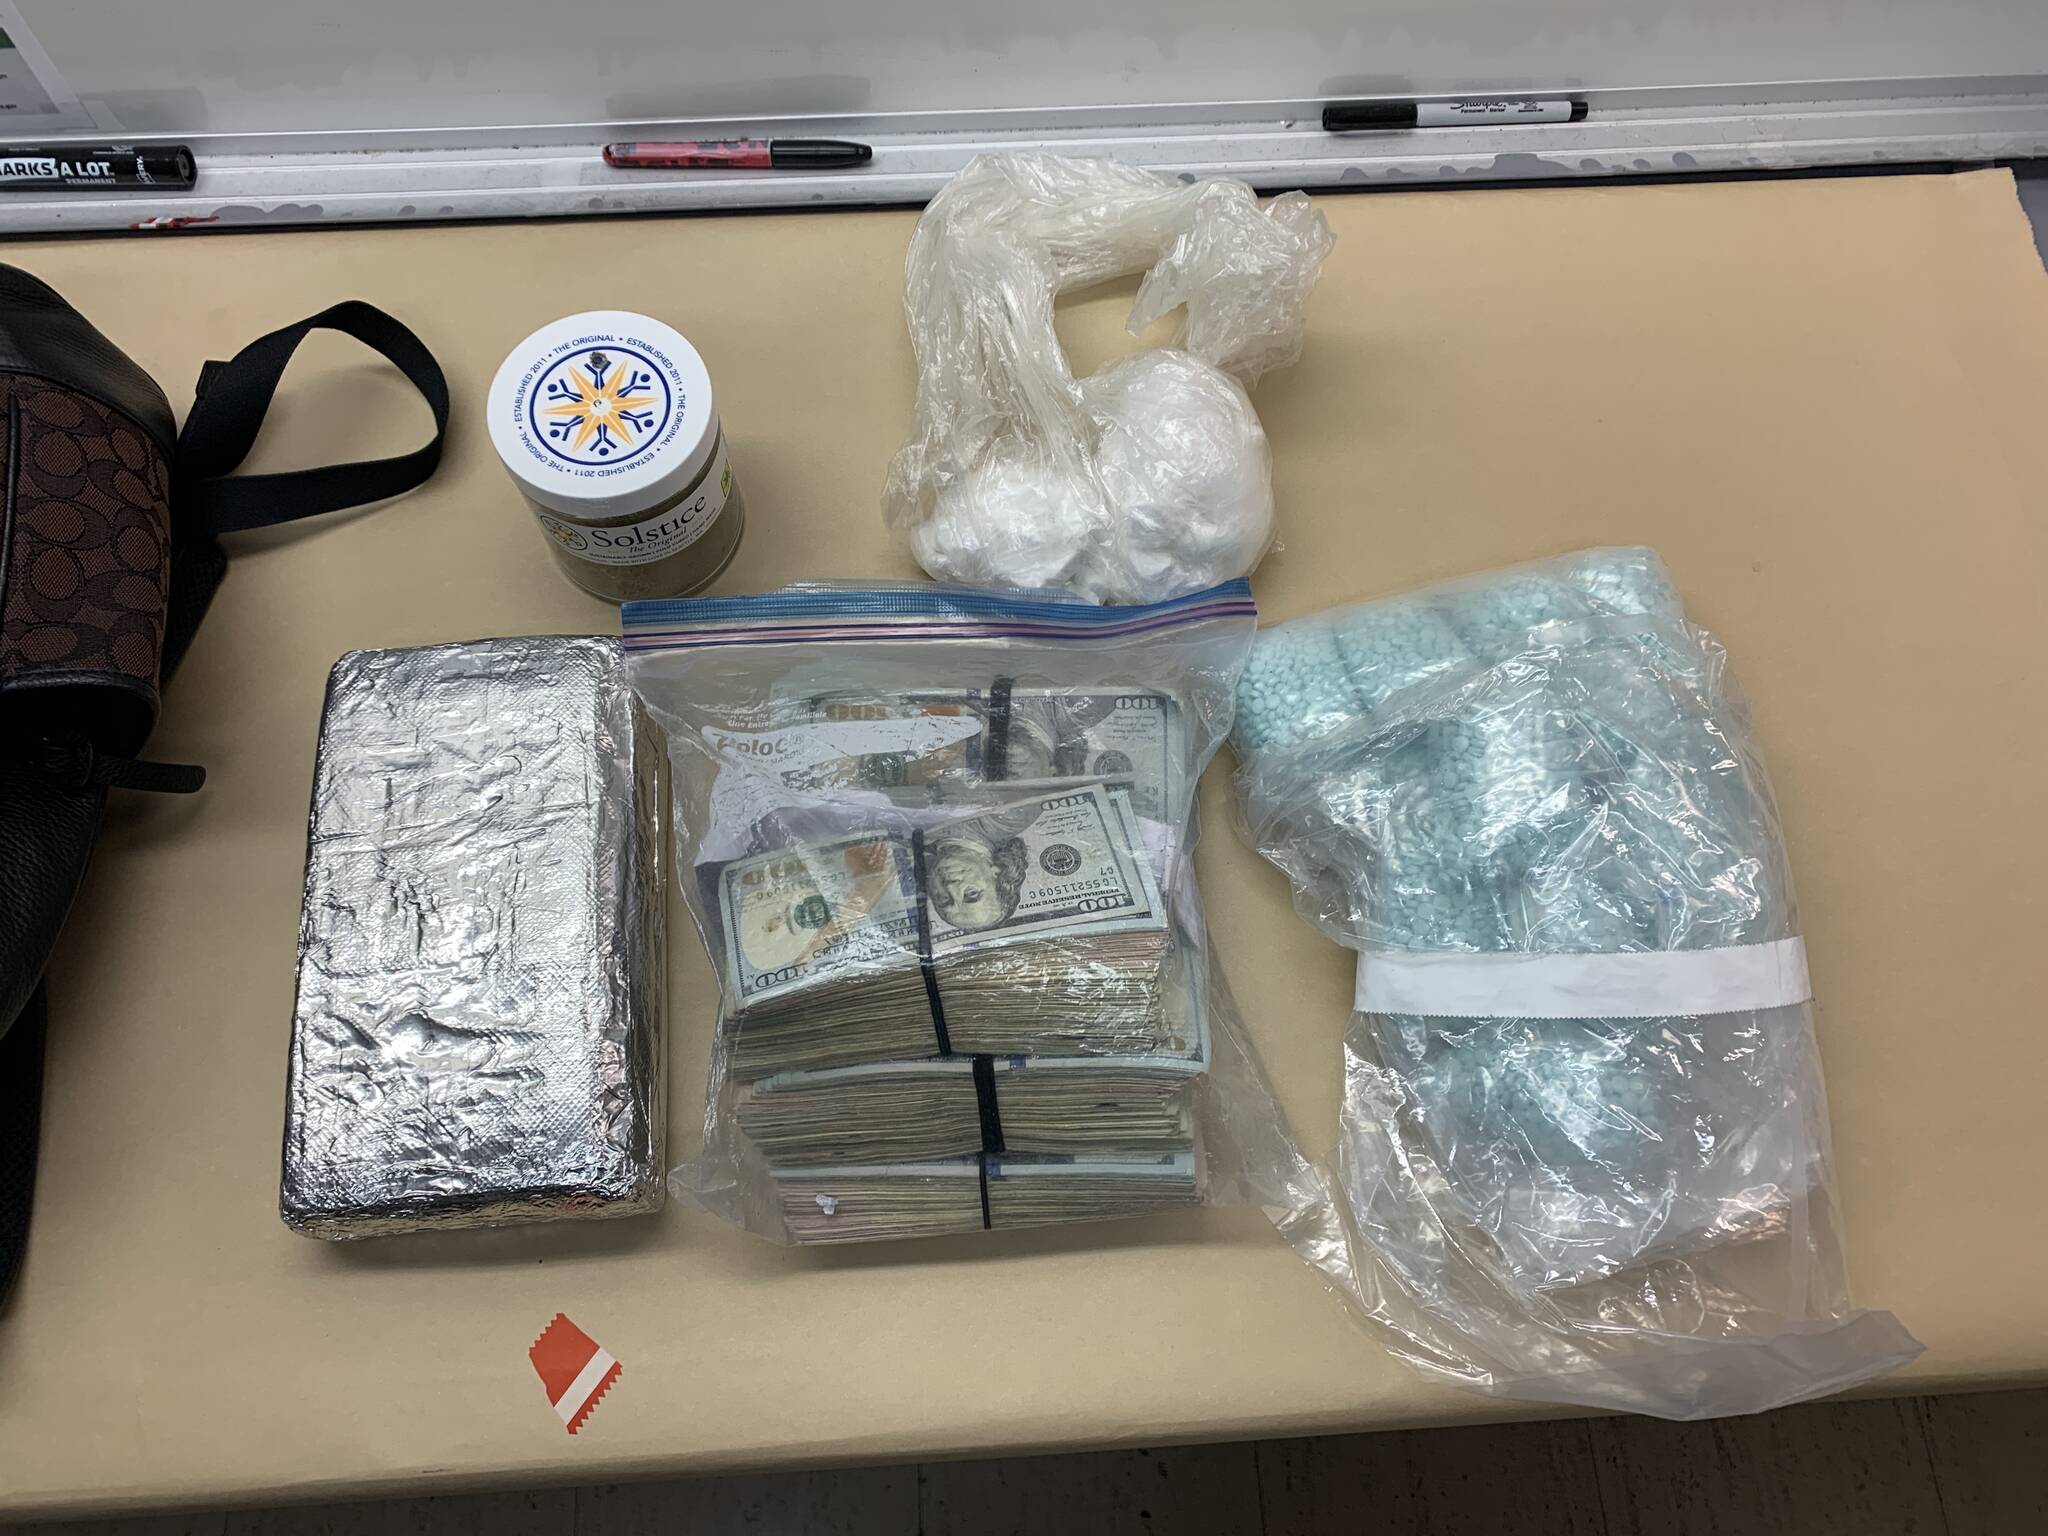 An Oak Harbor police photo shows plastic bags of suspected cocaine, a foil-covered brick of suspected cocaine, $79,000 in cash and large number blue “M30” pills.